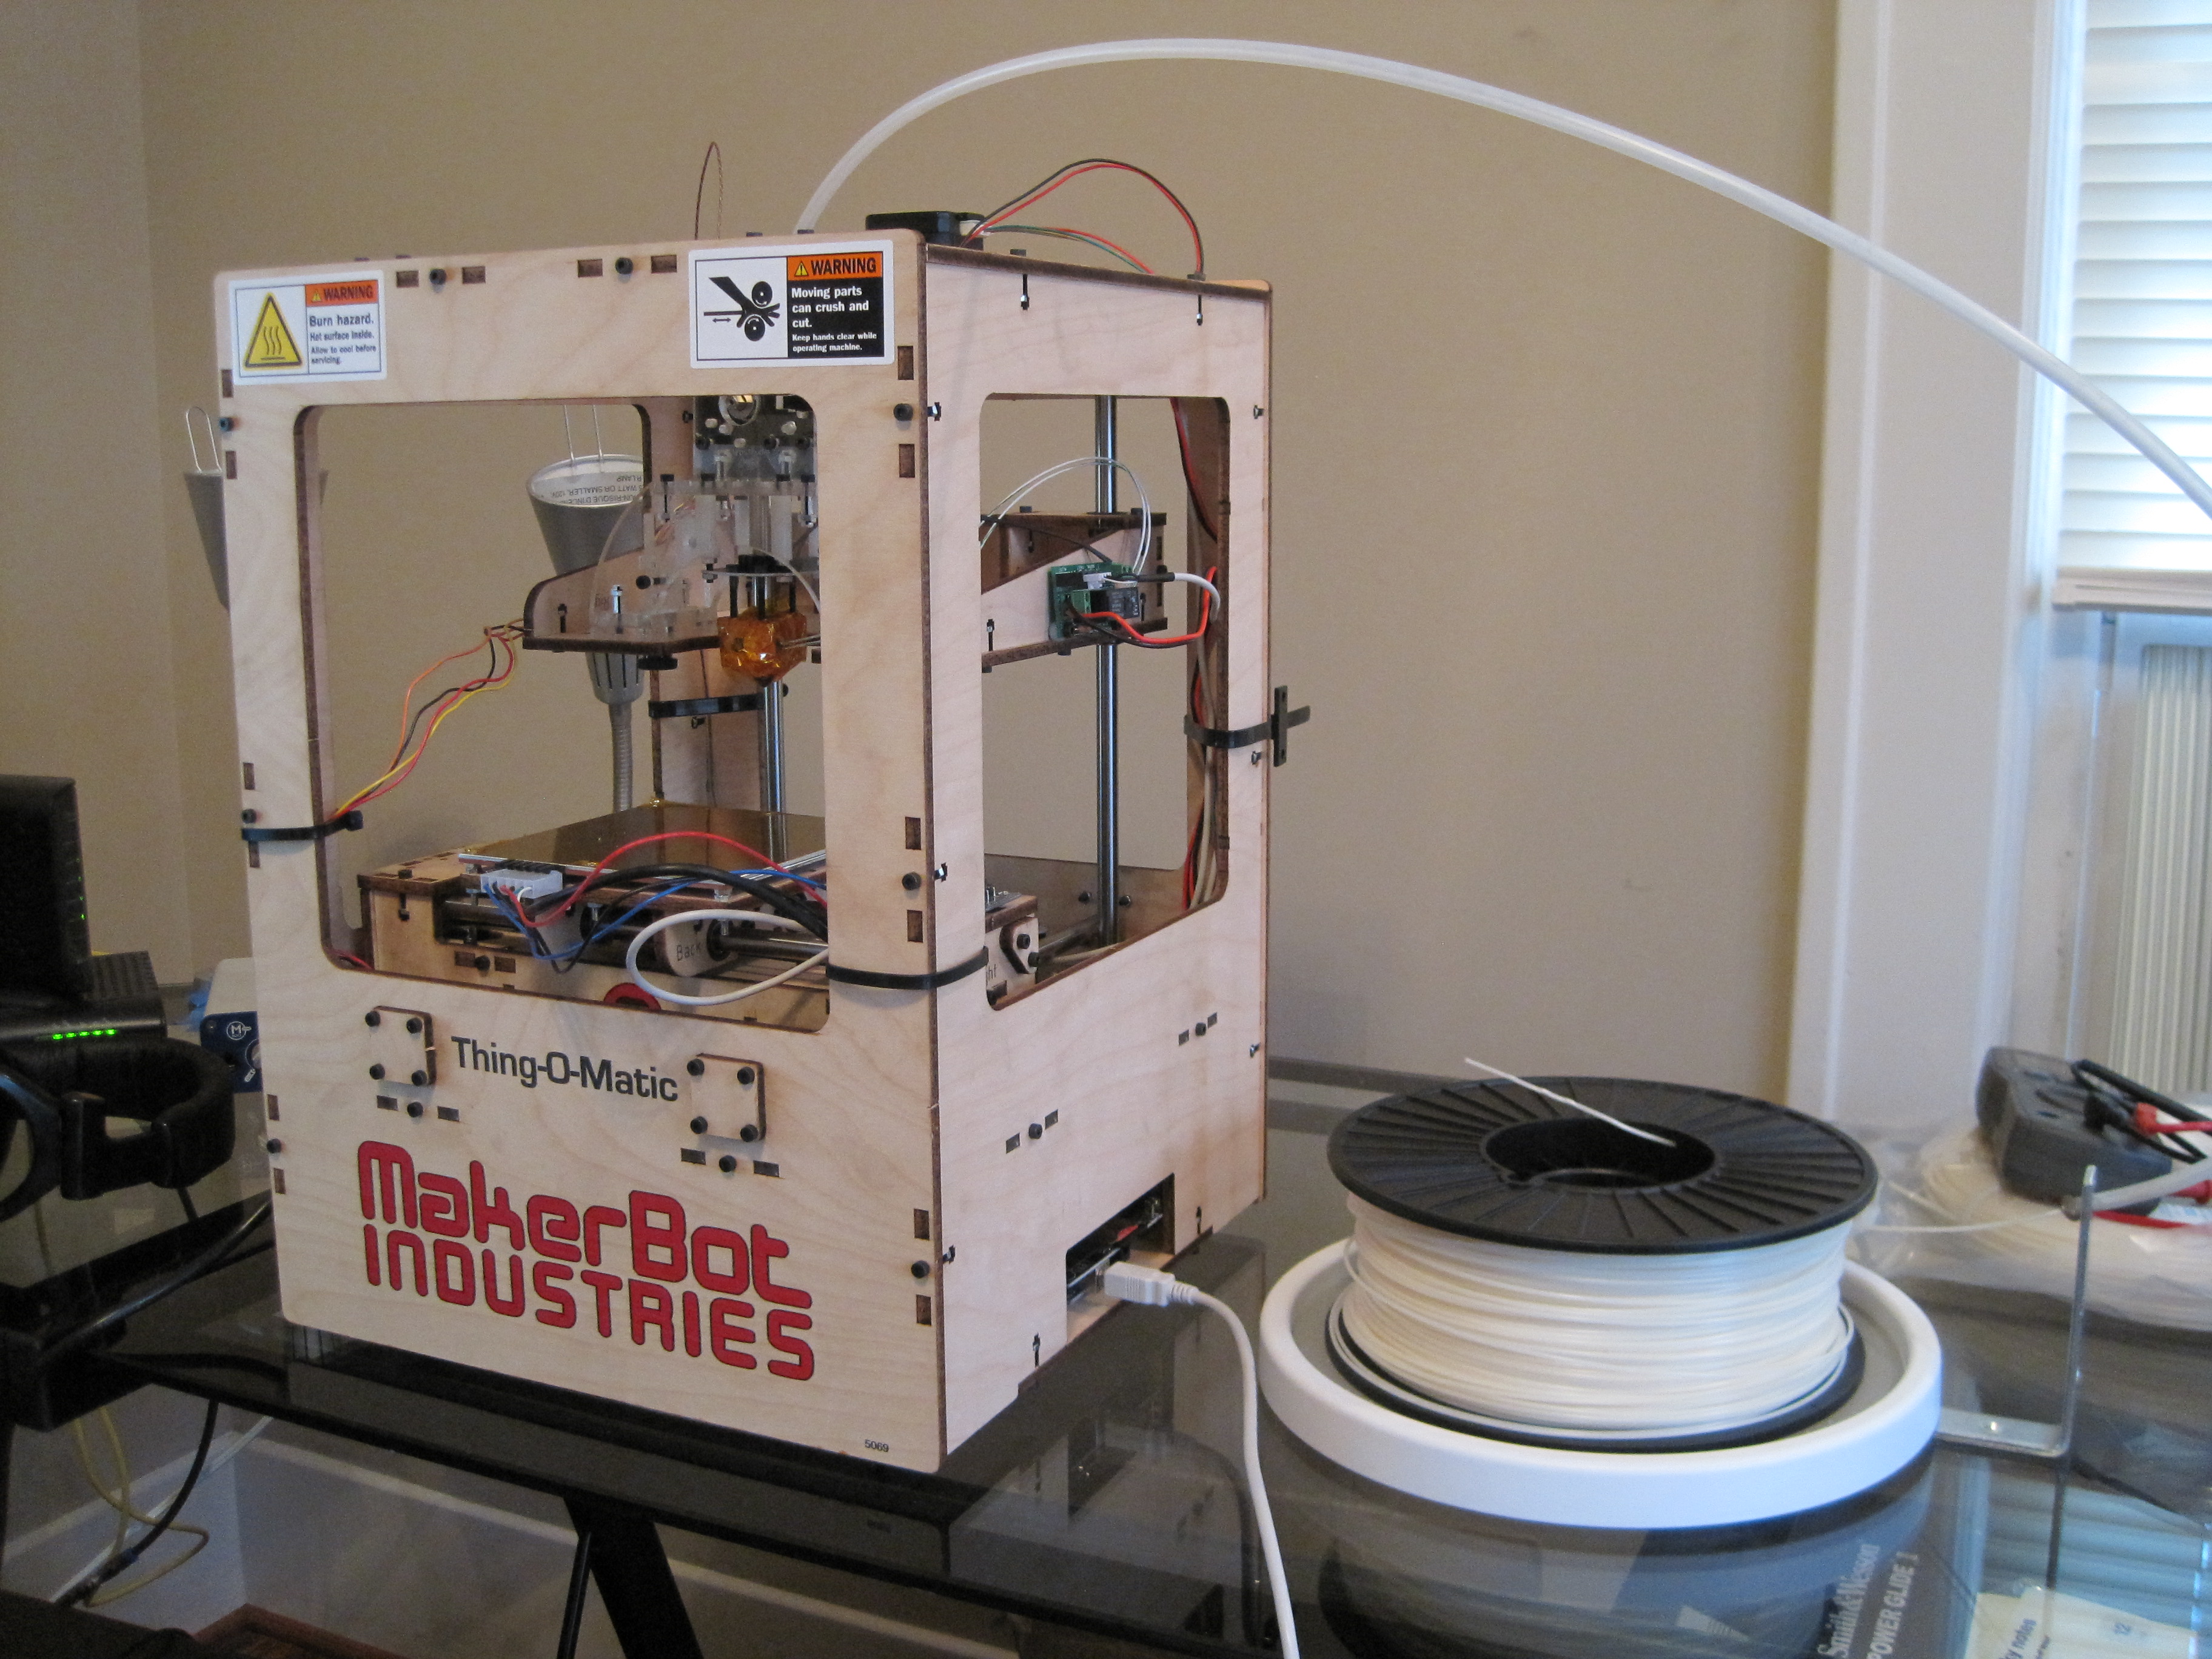 The $10 10-minute Filament Holder